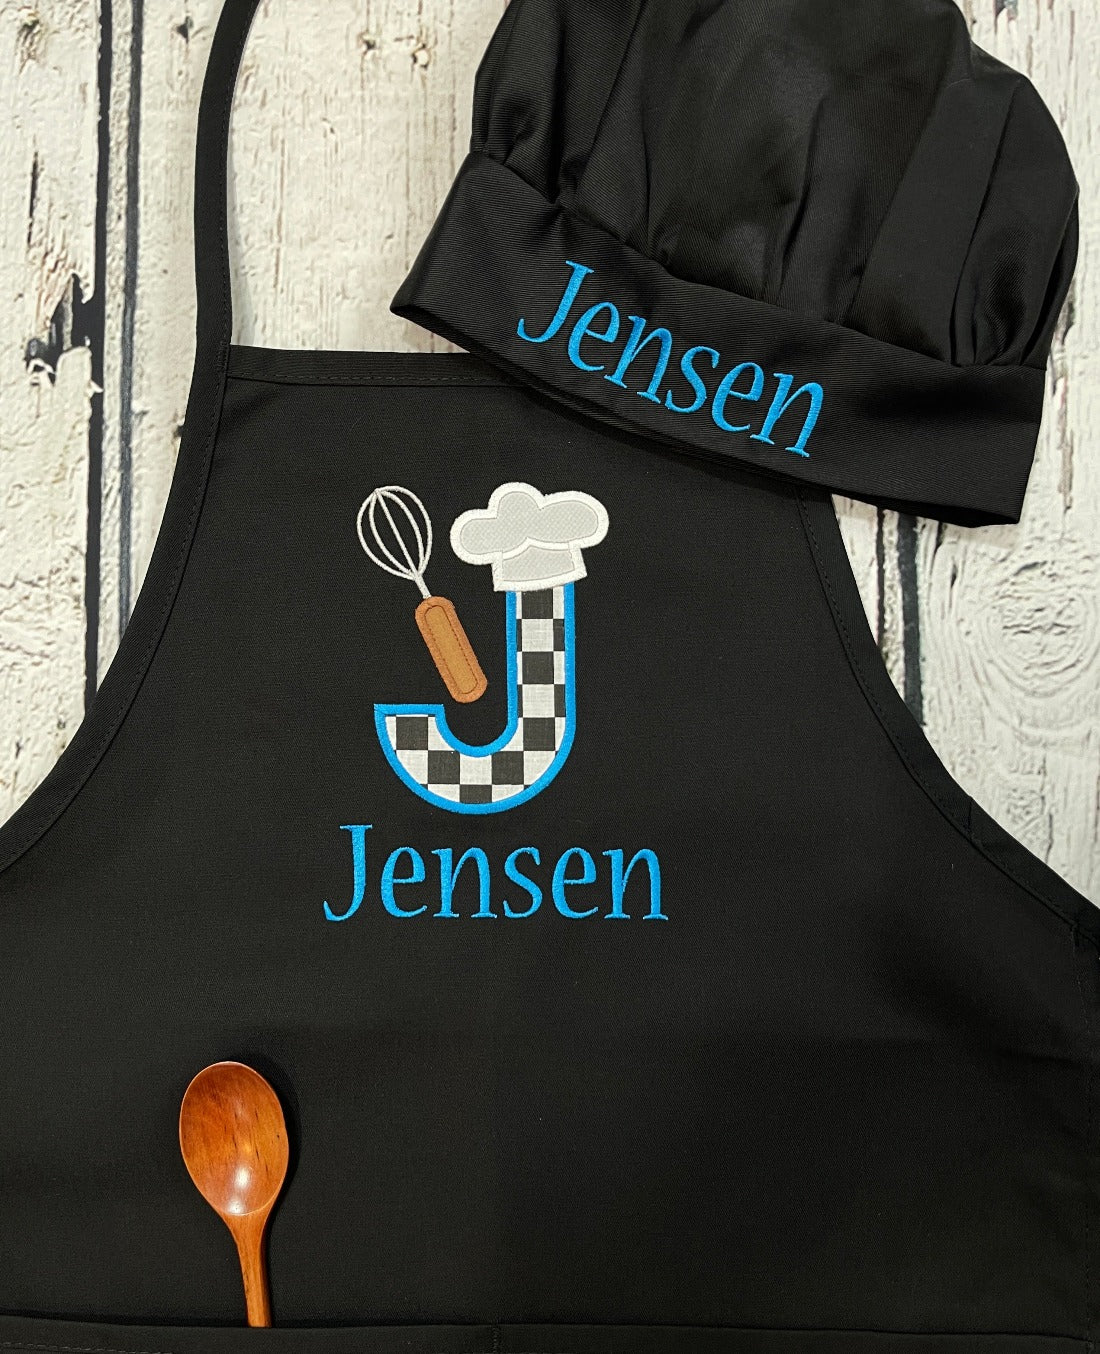 Personalized embroidered Father and Son apron set with optional chef hats